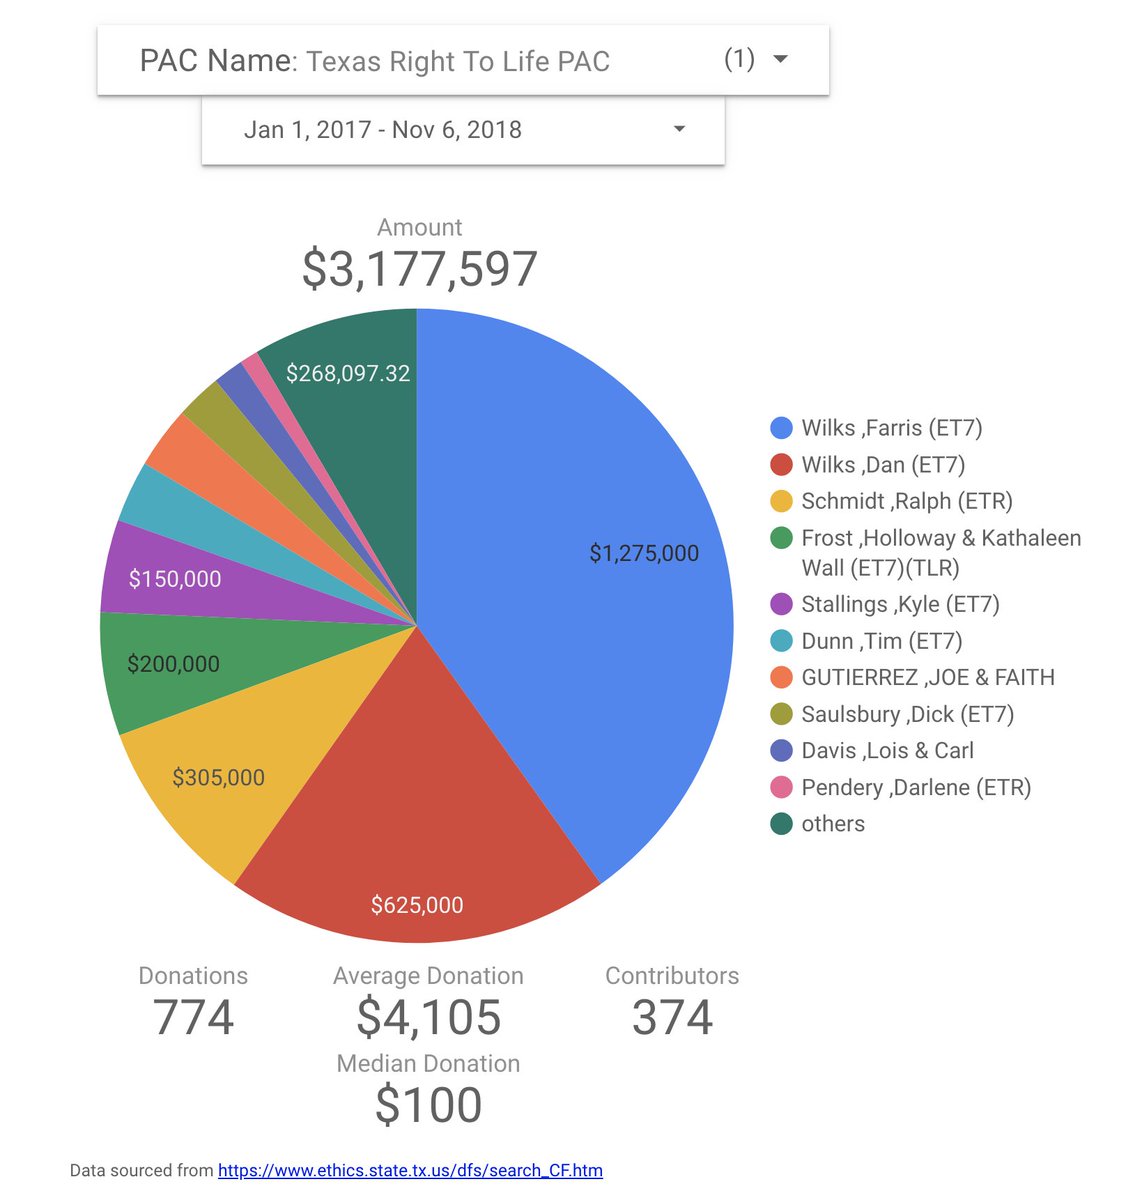 Now here are the primary donors to the Texas Right to Life PAC, who gave 91% of the $3.1 million the PAC took in.- Farris Wilks- Dan Wilks- Ralph Schmidt- Holloway Frost- Kyle Stallings- Tim Dunn- Joe Gutierrez- Dick Saulsbury- Lois Davis- Darlene Pendery